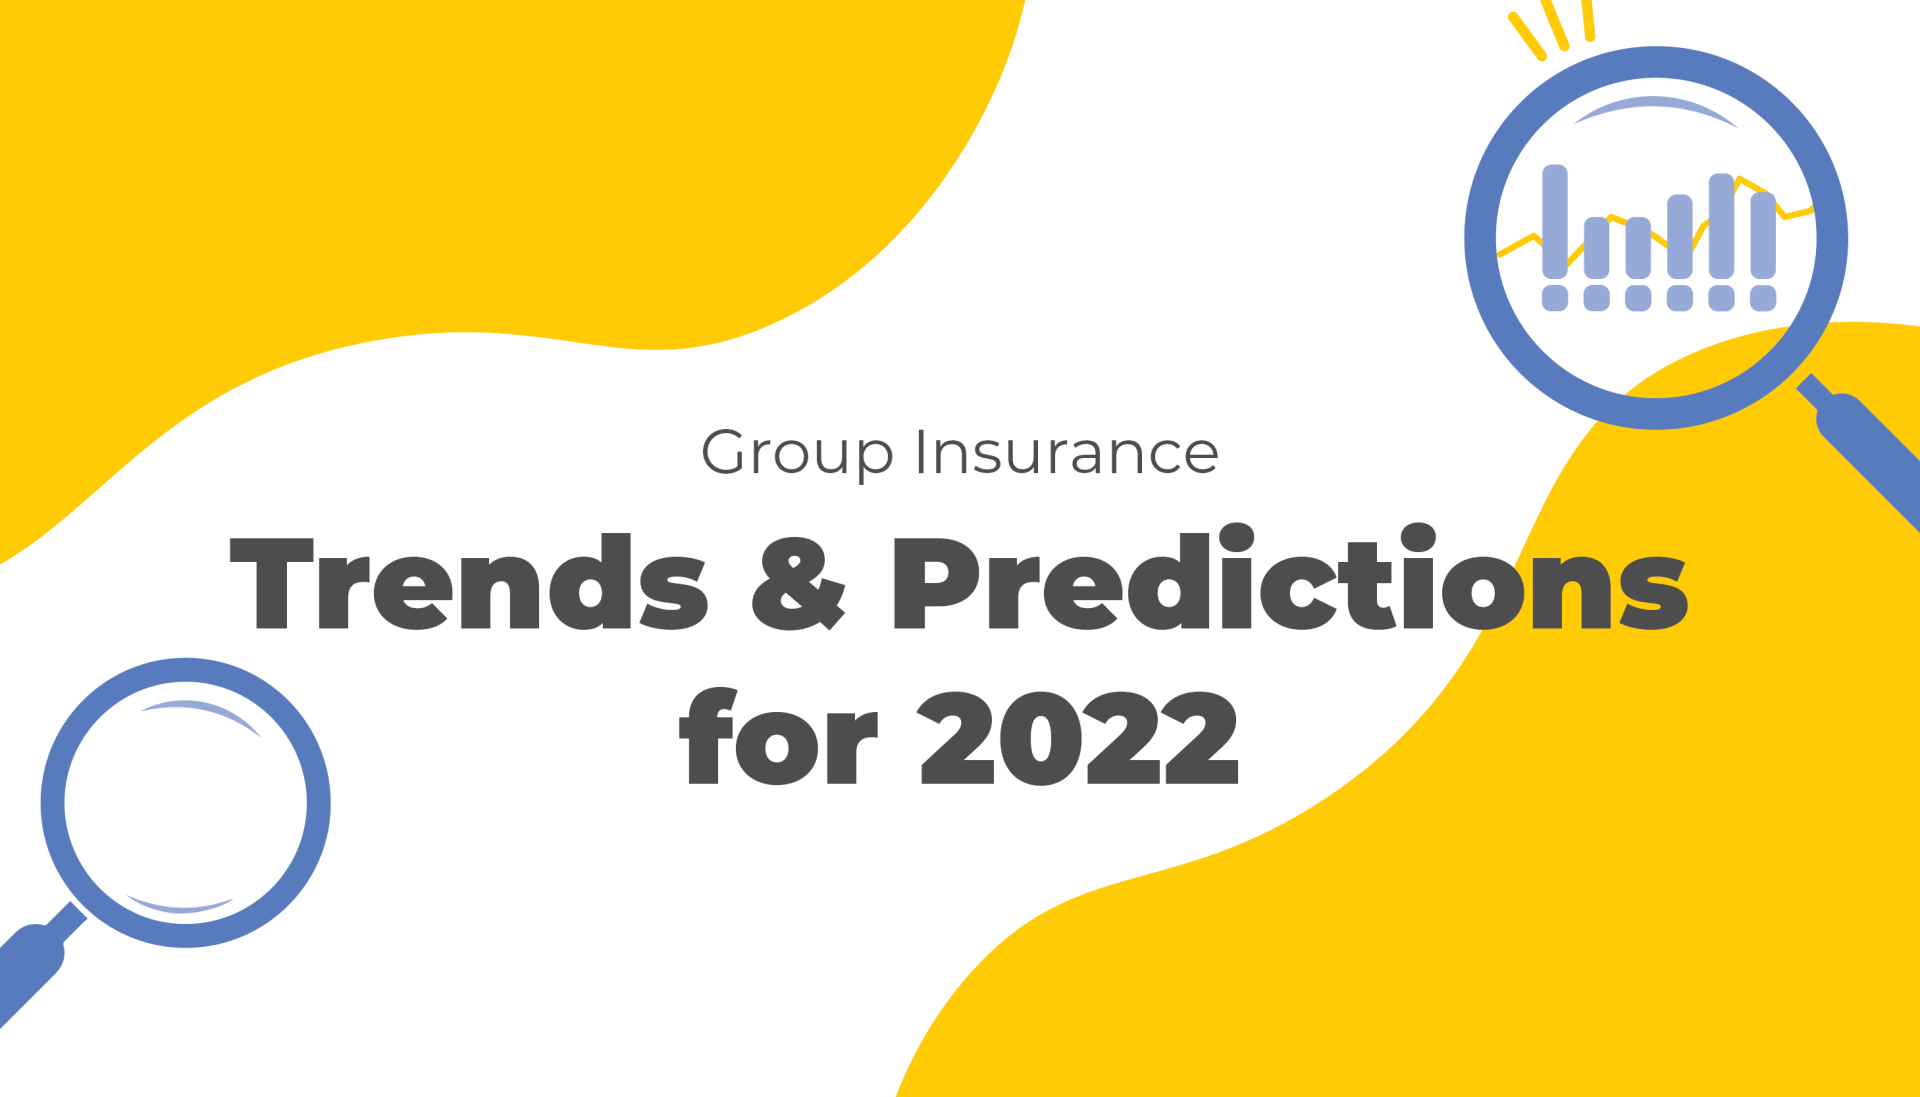 Group Insurance Trends & Predictions for 2022